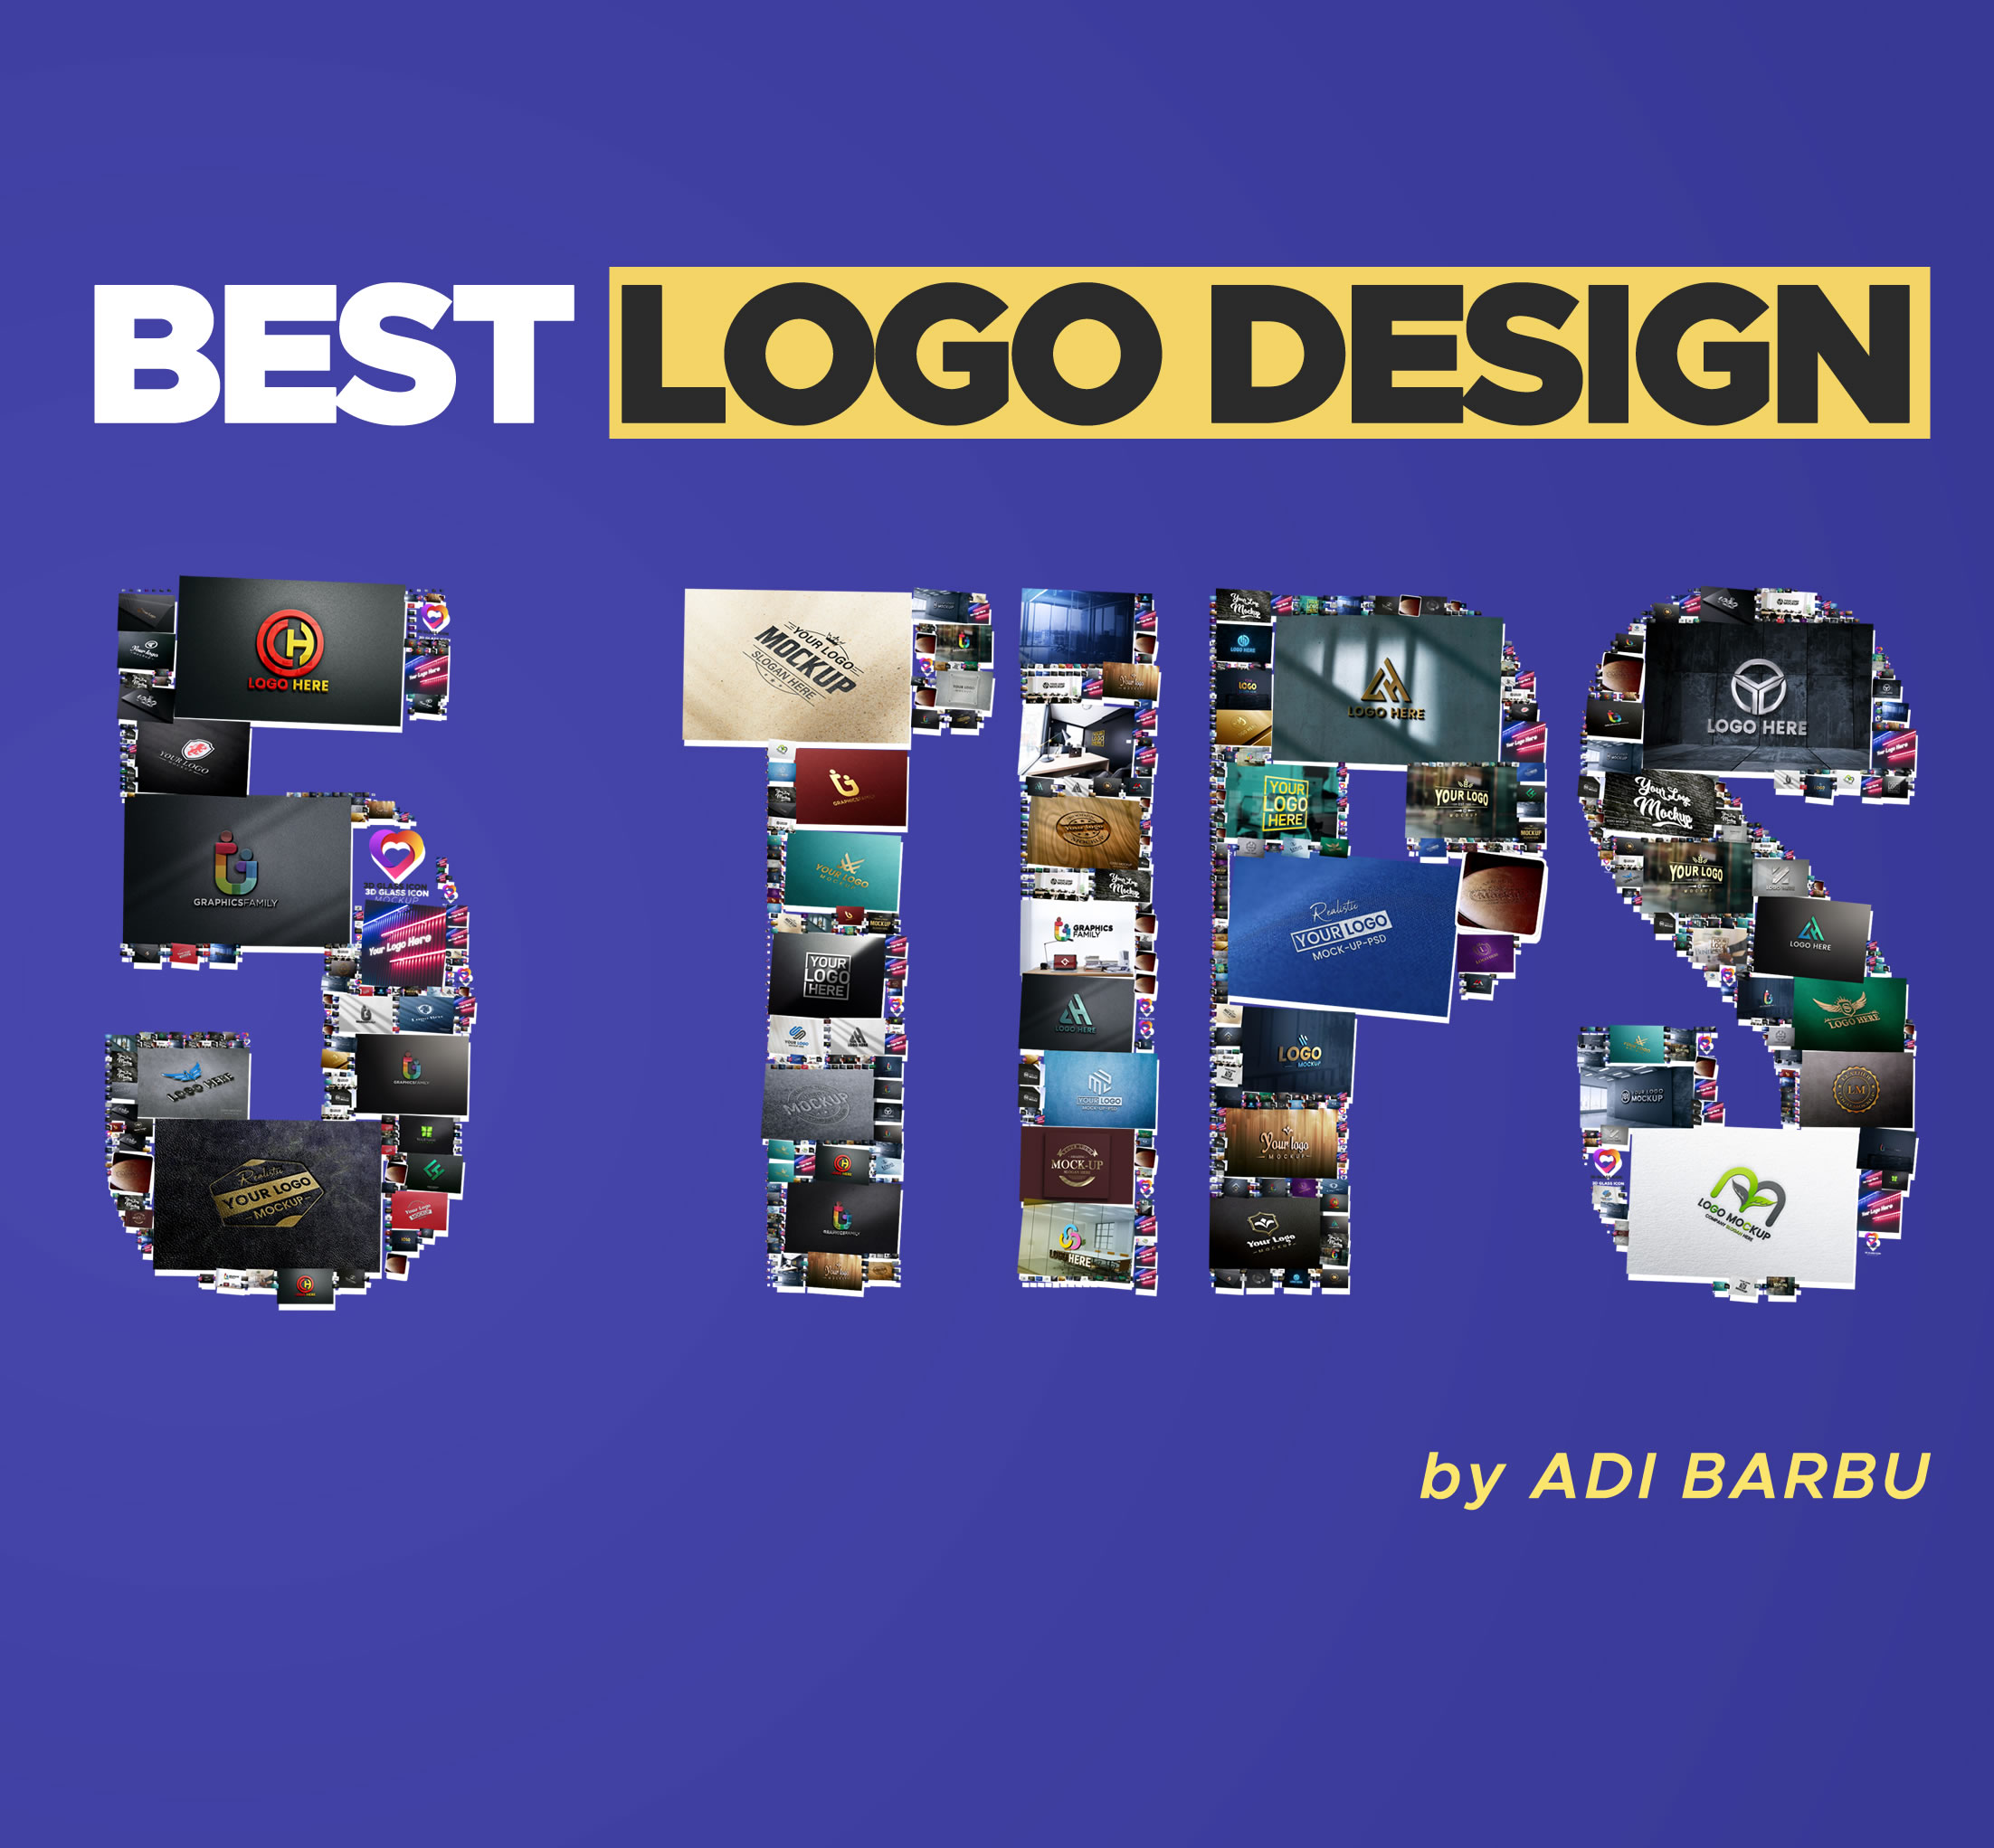 5 Logo Design Tips and Techniques to Create a Winning Logo